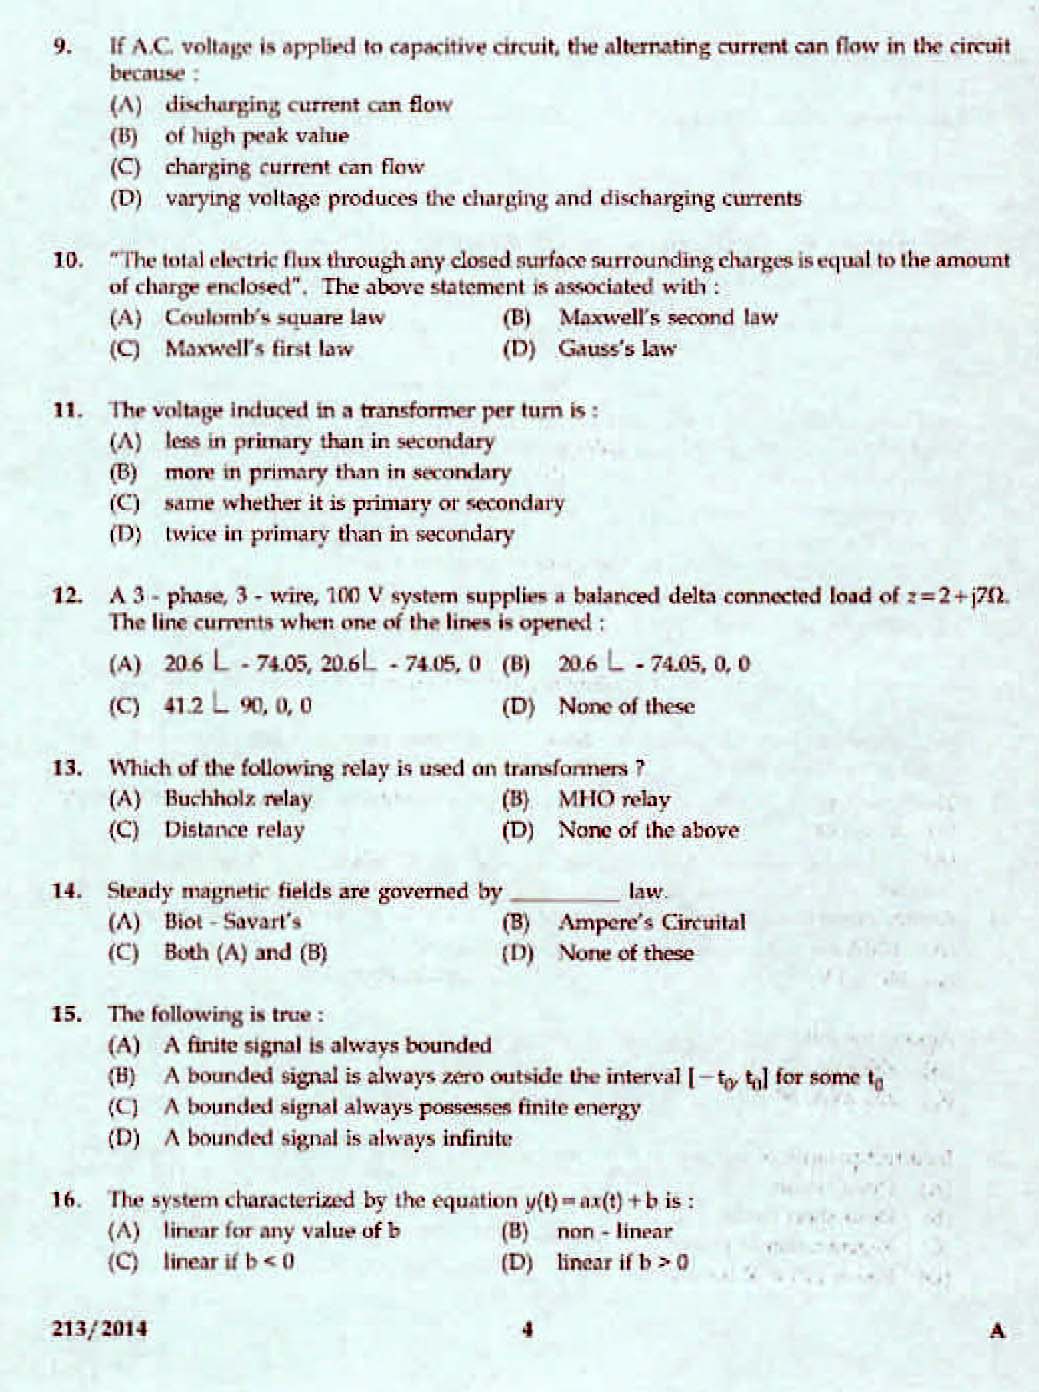 Kerala PSC Assistant Engineer Electrical Exam 2014 Question Paper Code 2132014 2